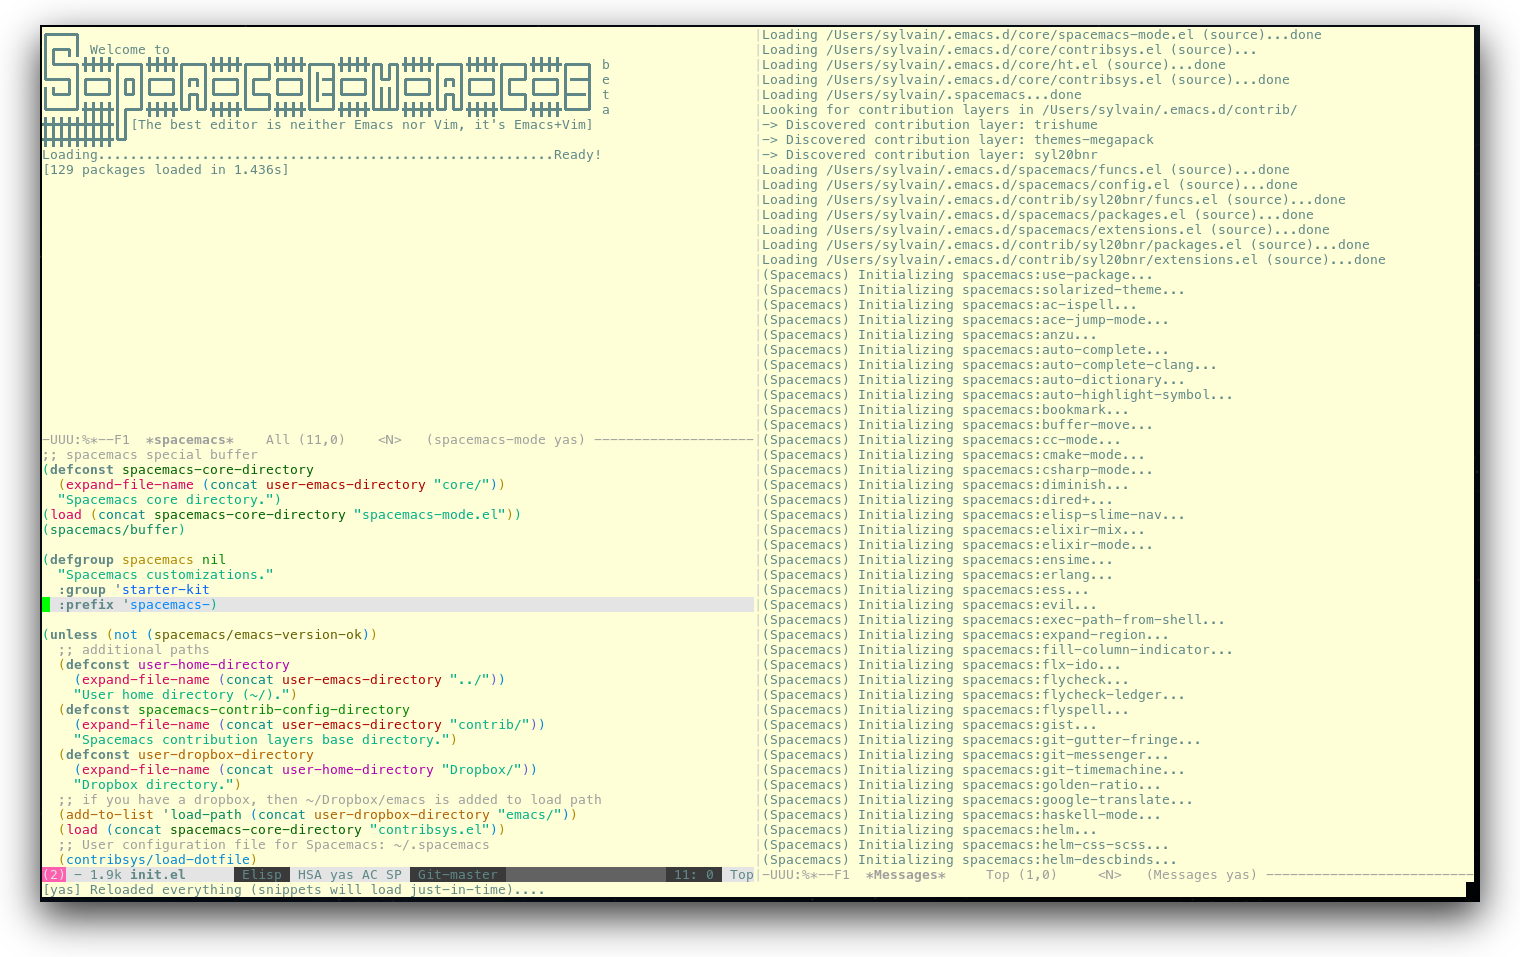 /TakeV/spacemacs/media/commit/163b82c96021b00b69e20b99c81558d38006e391/doc/img/spacemacs-urxvt.png